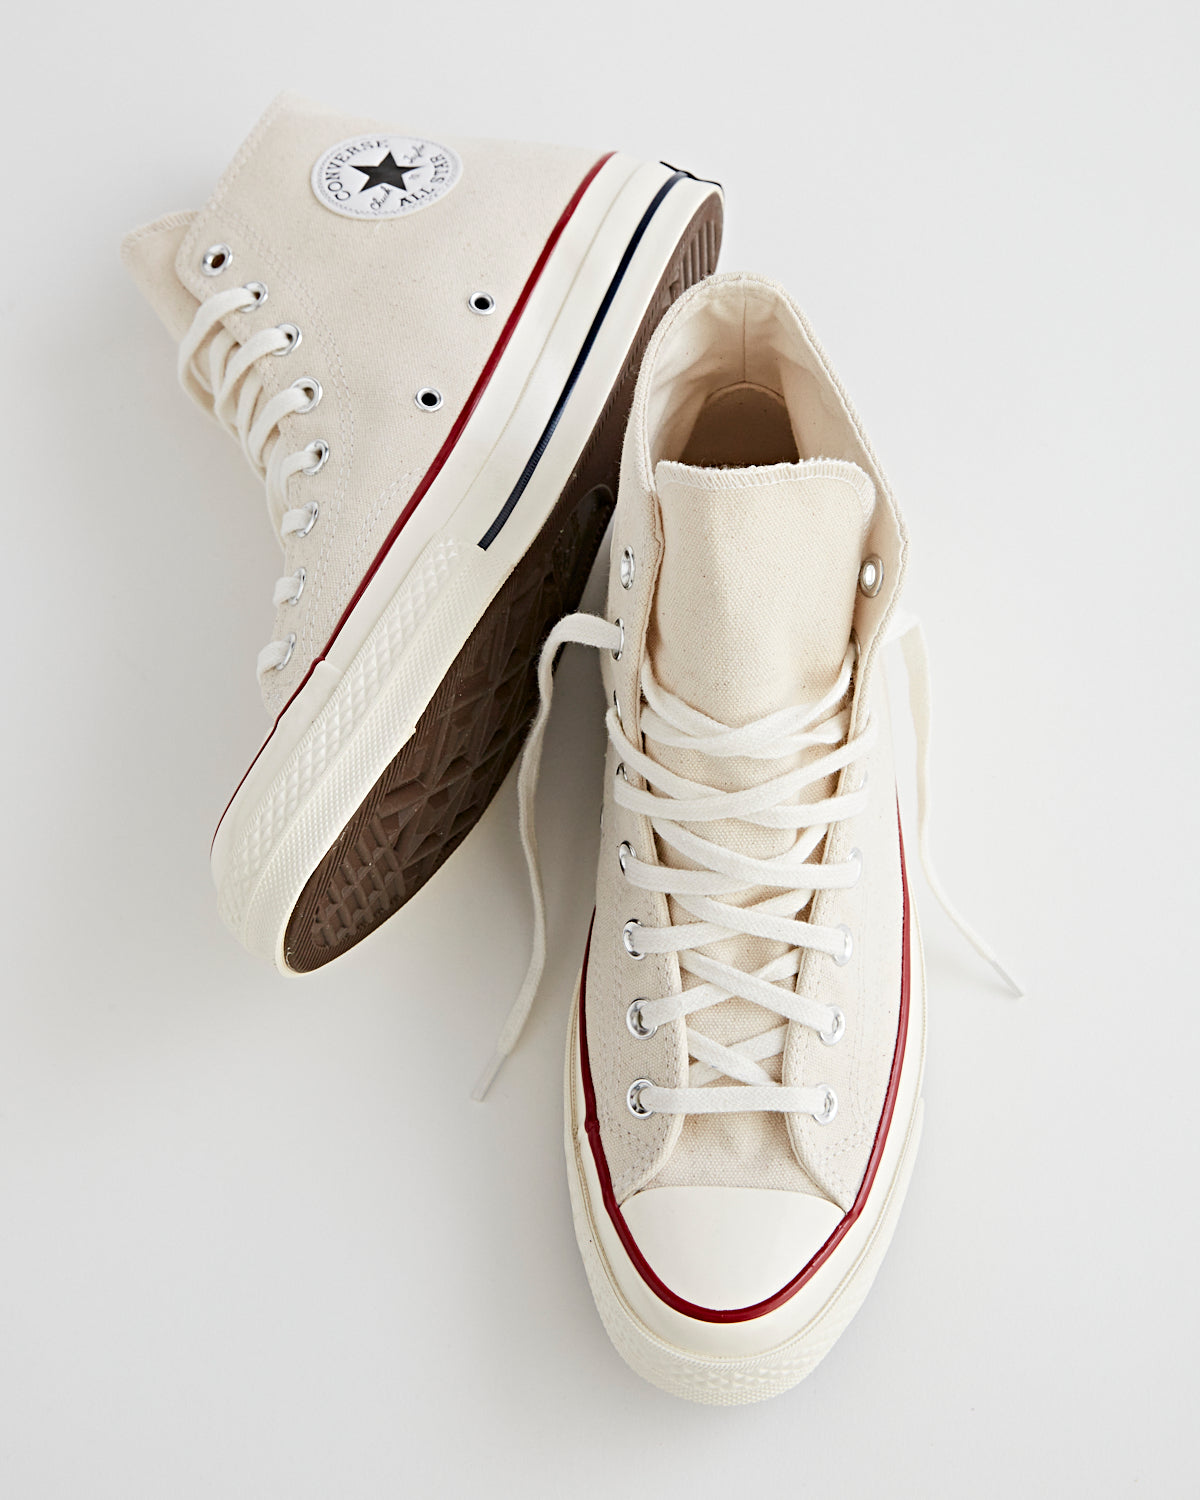 Converse Shoes All Star